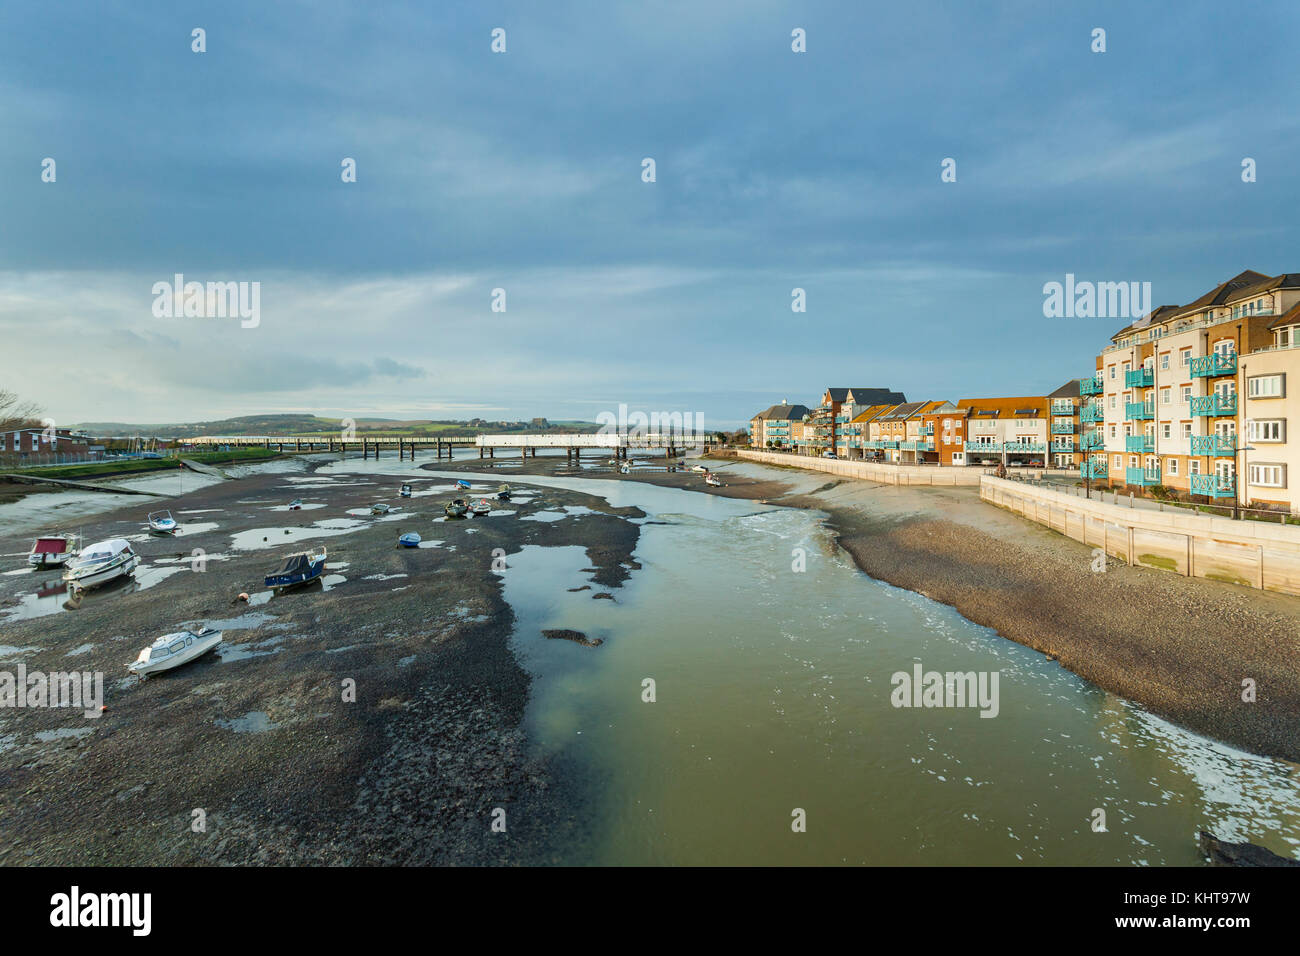 River Adur at Shoreham-by-Sea, West Sussex, England. Stock Photo